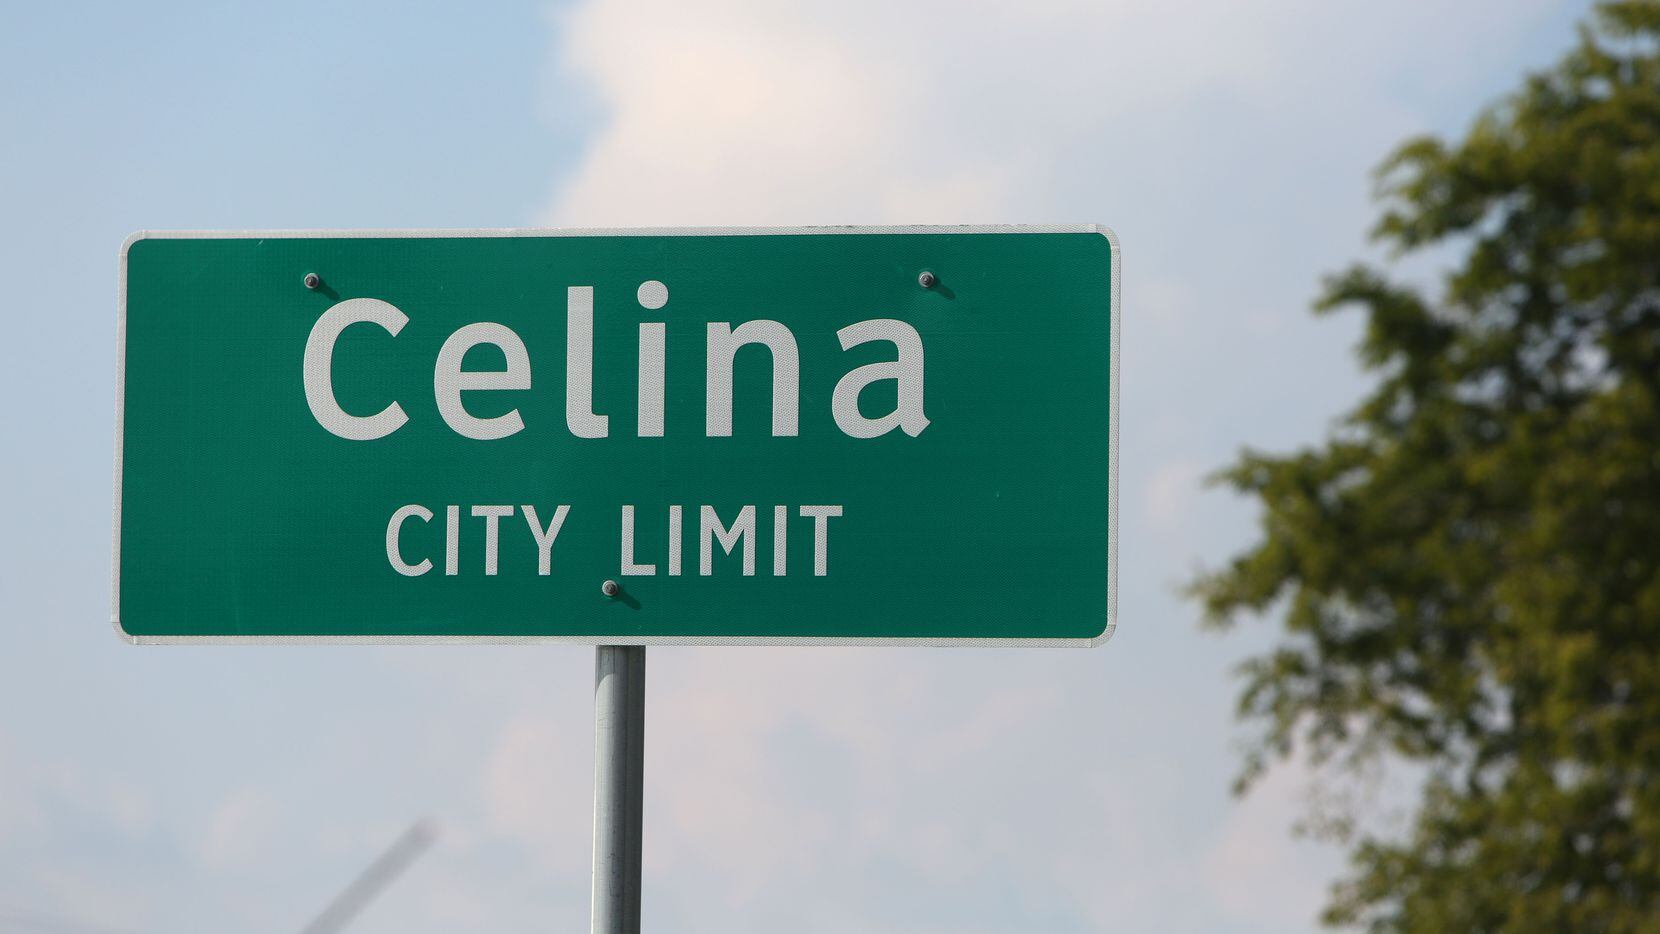 The property is nine miles southwest of Celina and one mile from the Dallas North Tollway.